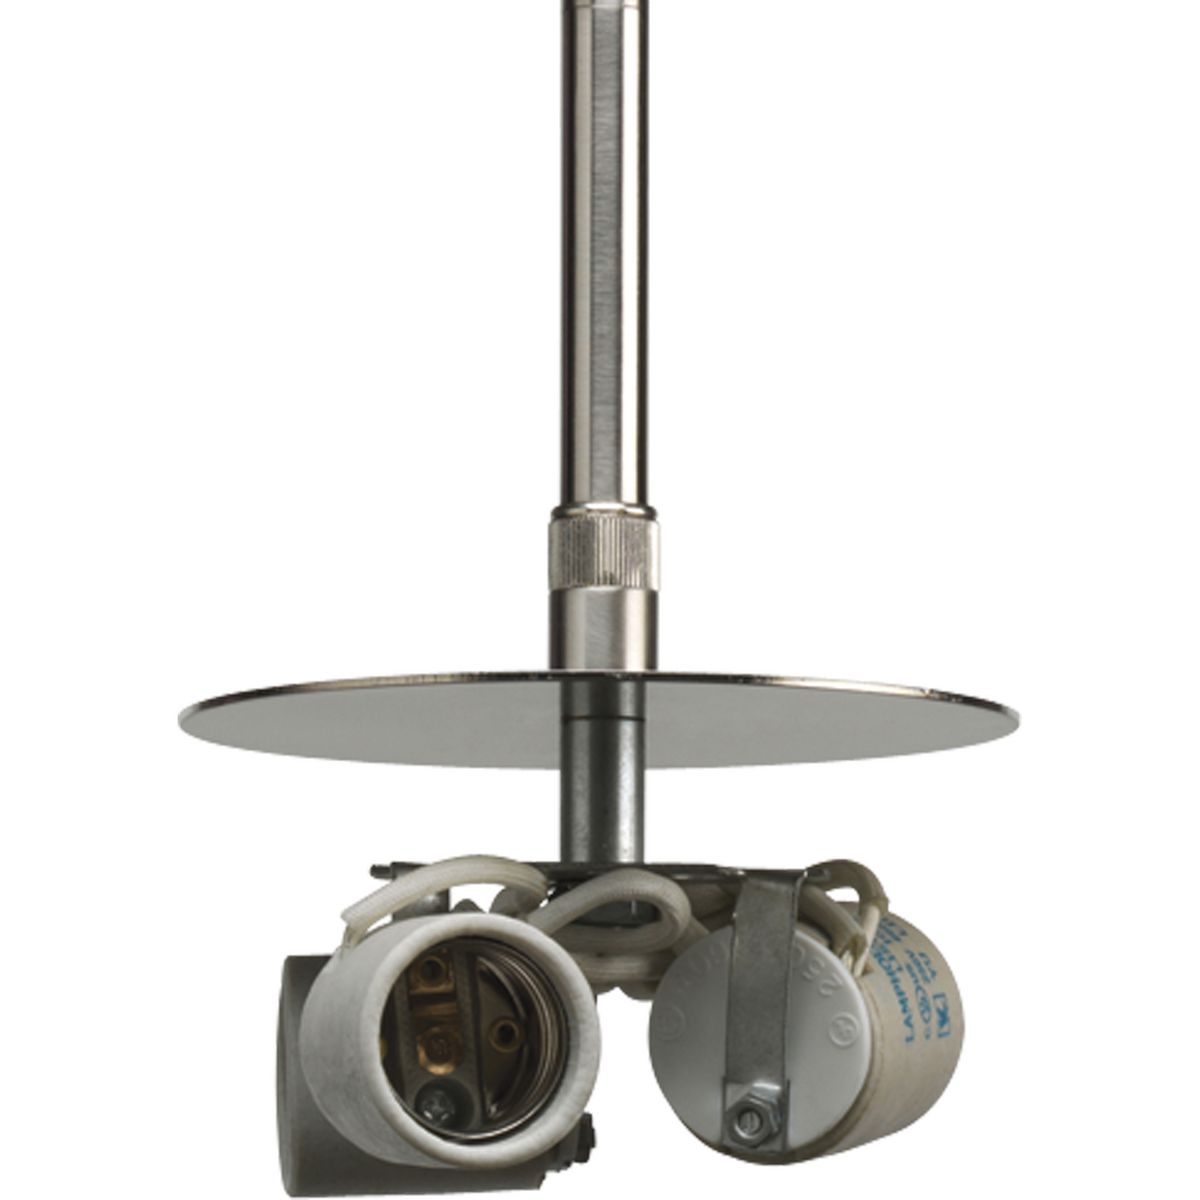 P5199-09 3-100W MED STEM MNTED PENDANT